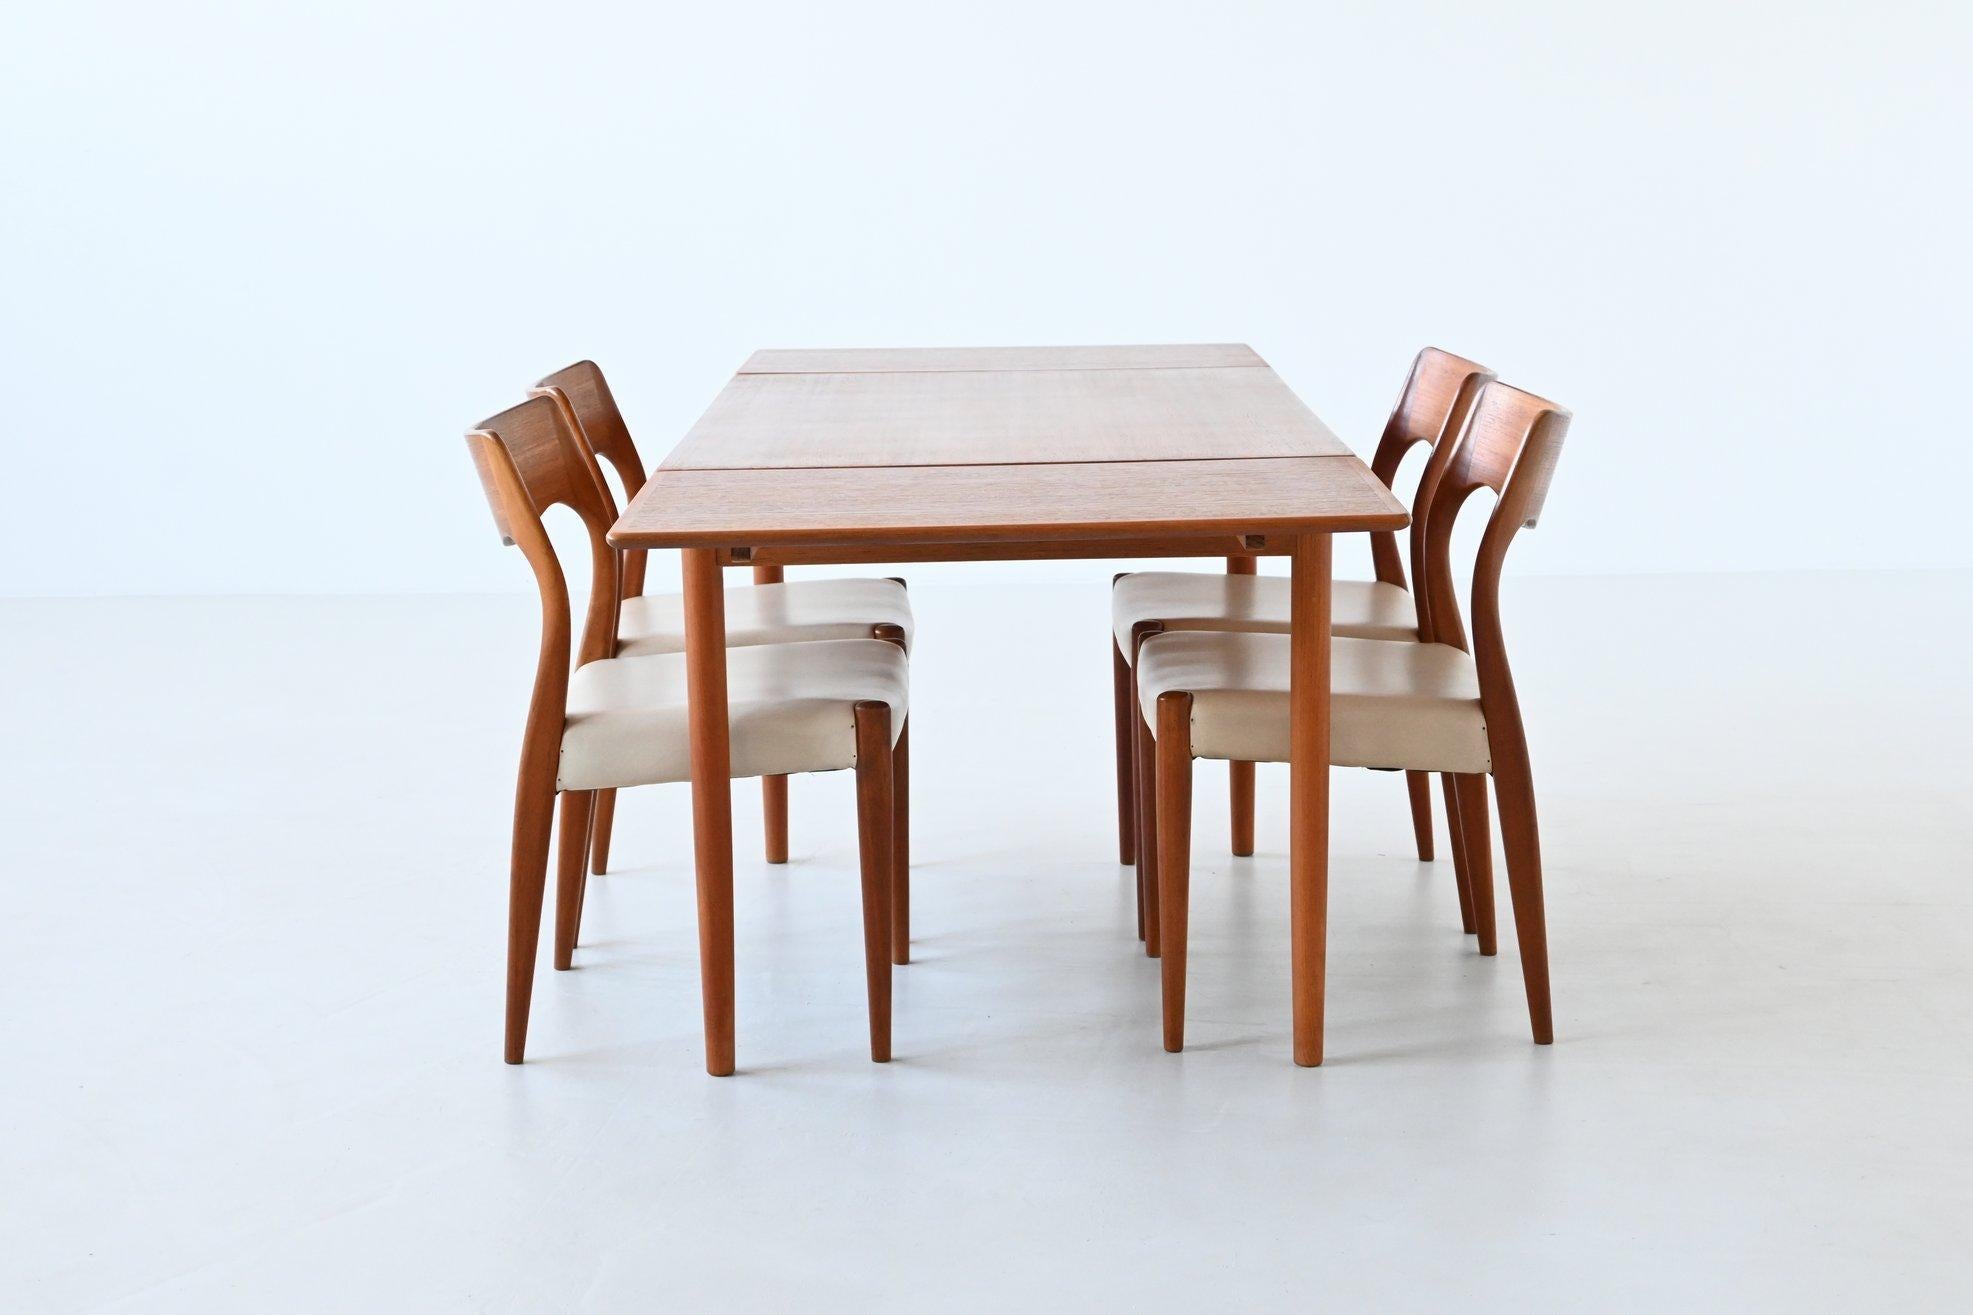 Beautiful Scandinavian dining table by unknown designer or manufacturer, Denmark 1960. This well-crafted table is characterized by a strong and solid construction executed in teak. The teak has a natural expression due to the beautiful wooden grains